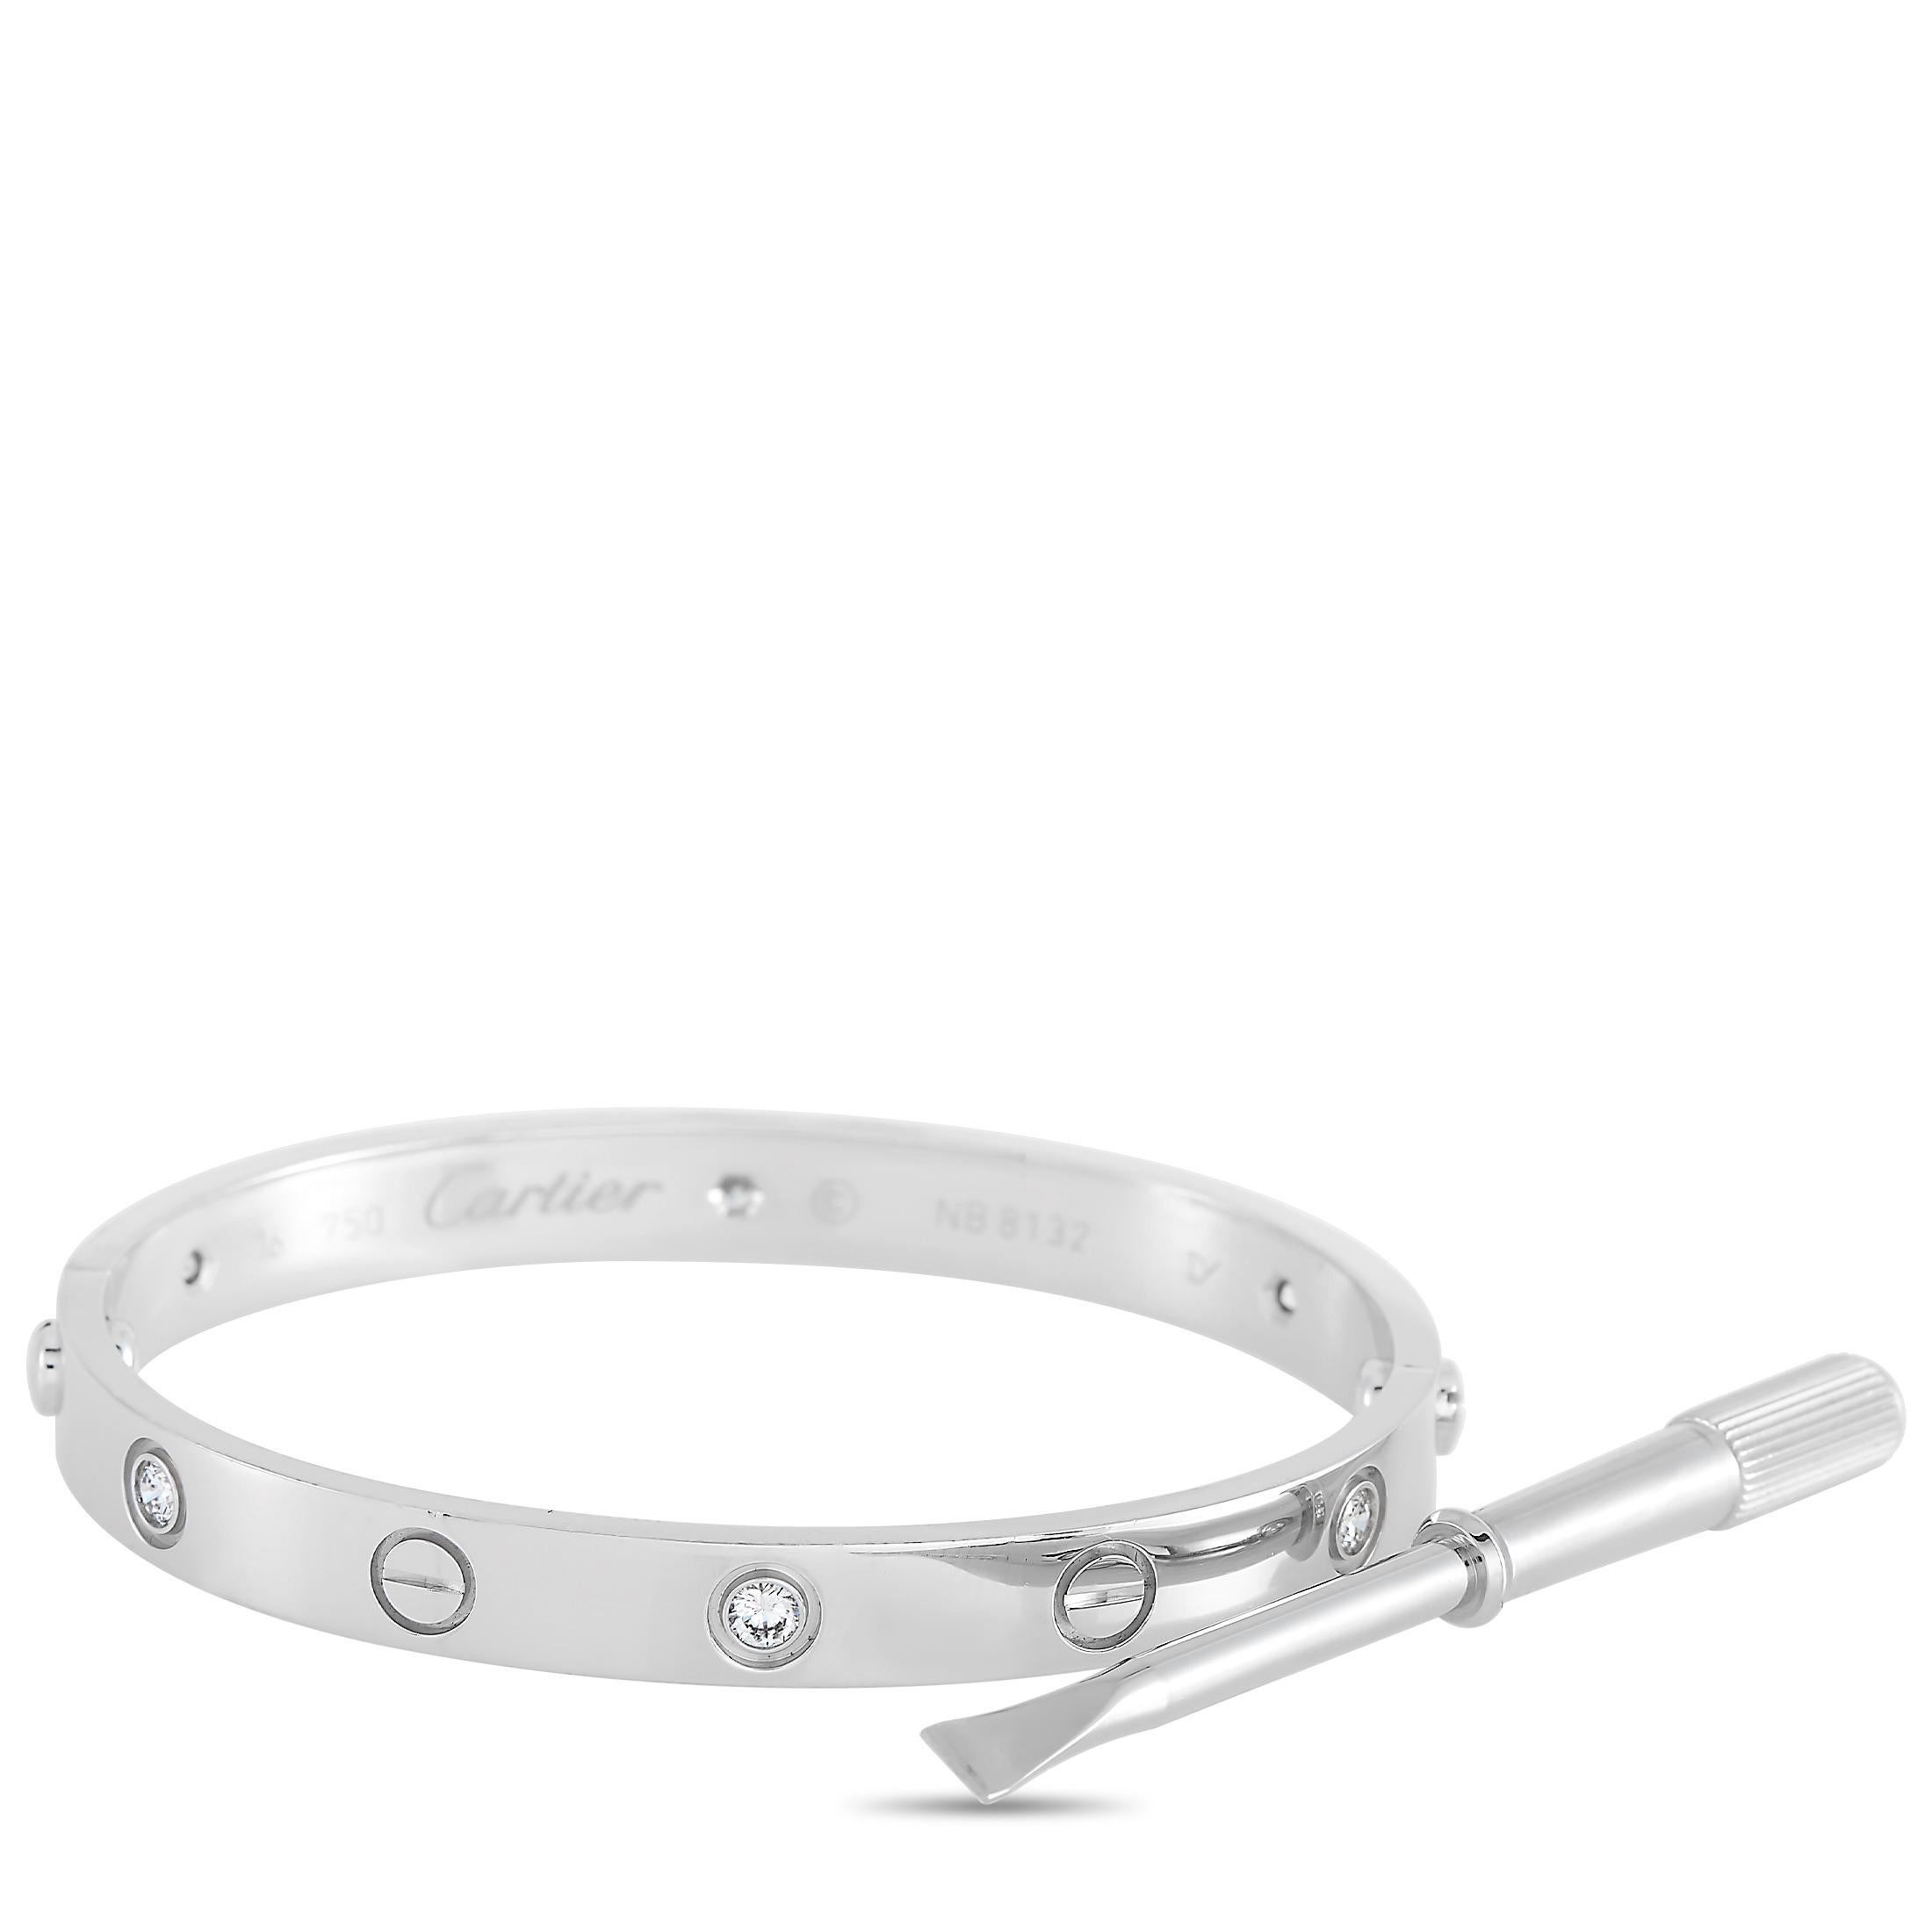 This LOVE bracelet is a classic Cartier offering. The bangle is made with 18K white gold and features the iconic Cartier screw motif and is set with six round diamonds. The inside of the bangle is inscribed with the brand name. The bracelet has a